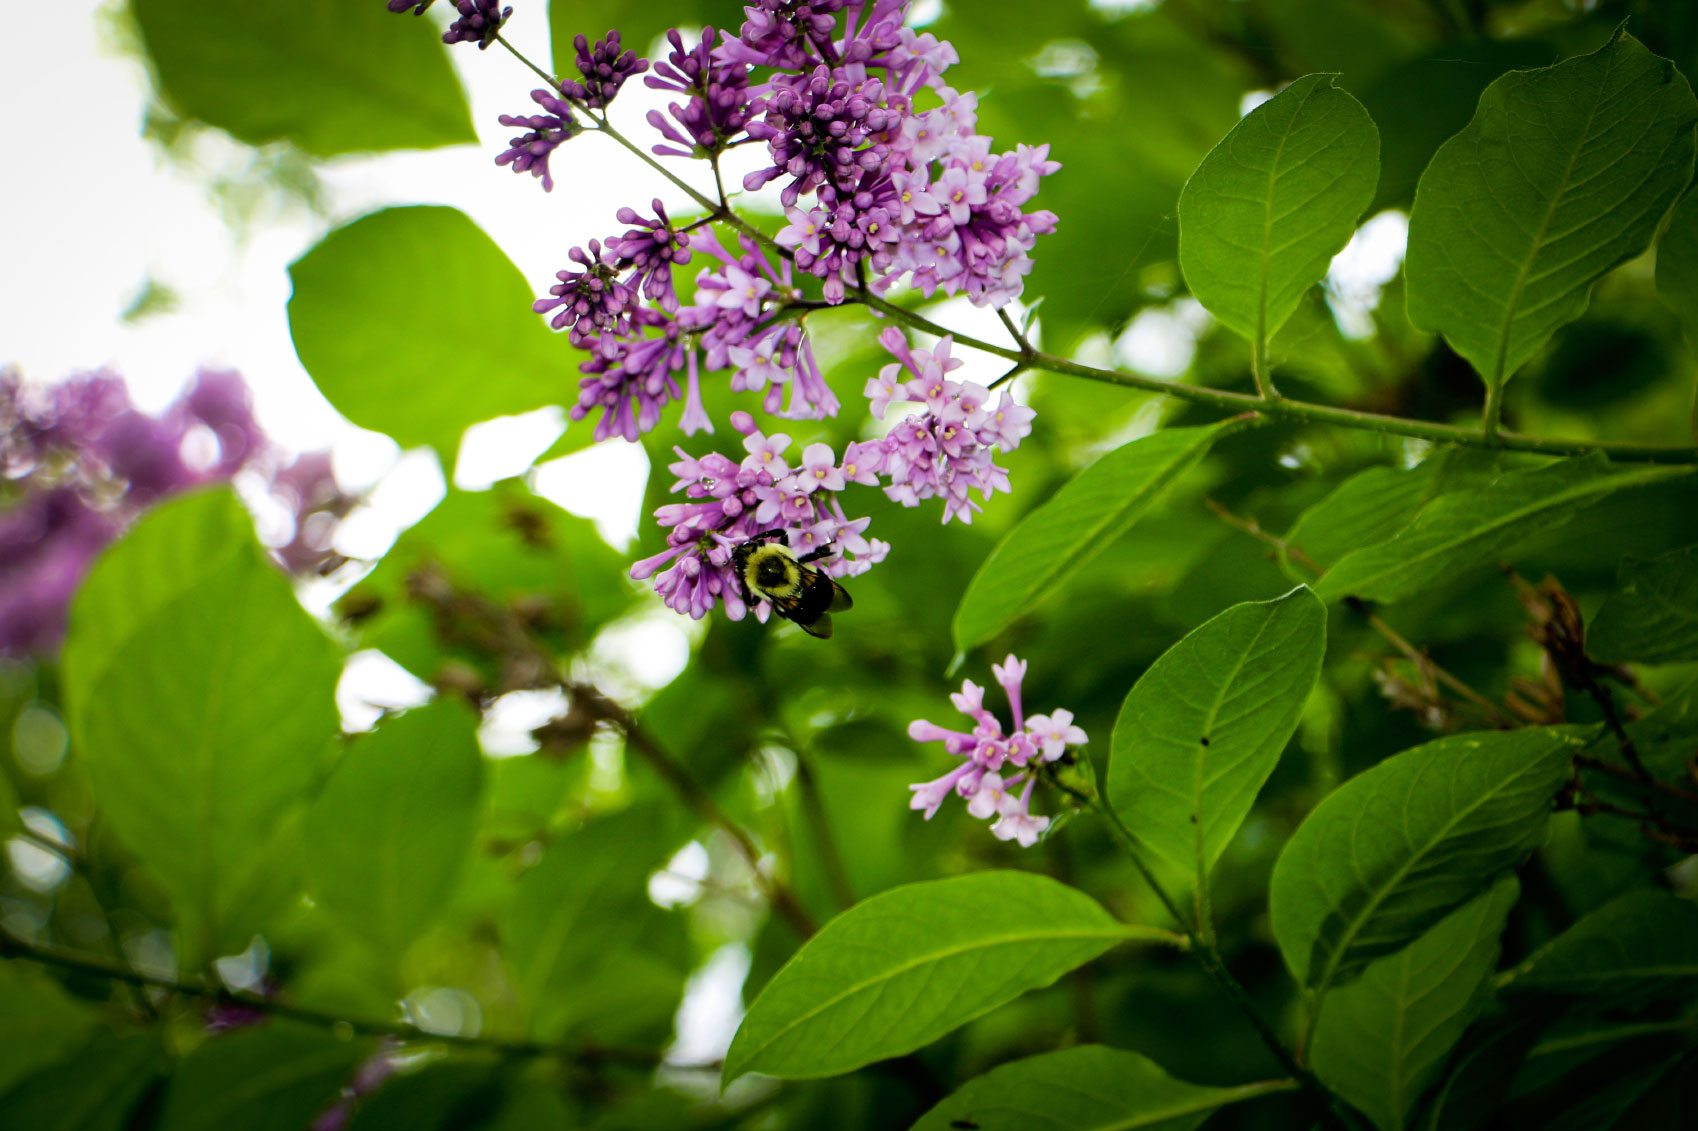 A bunch of purple lilac flowers surrounded by many green leaves